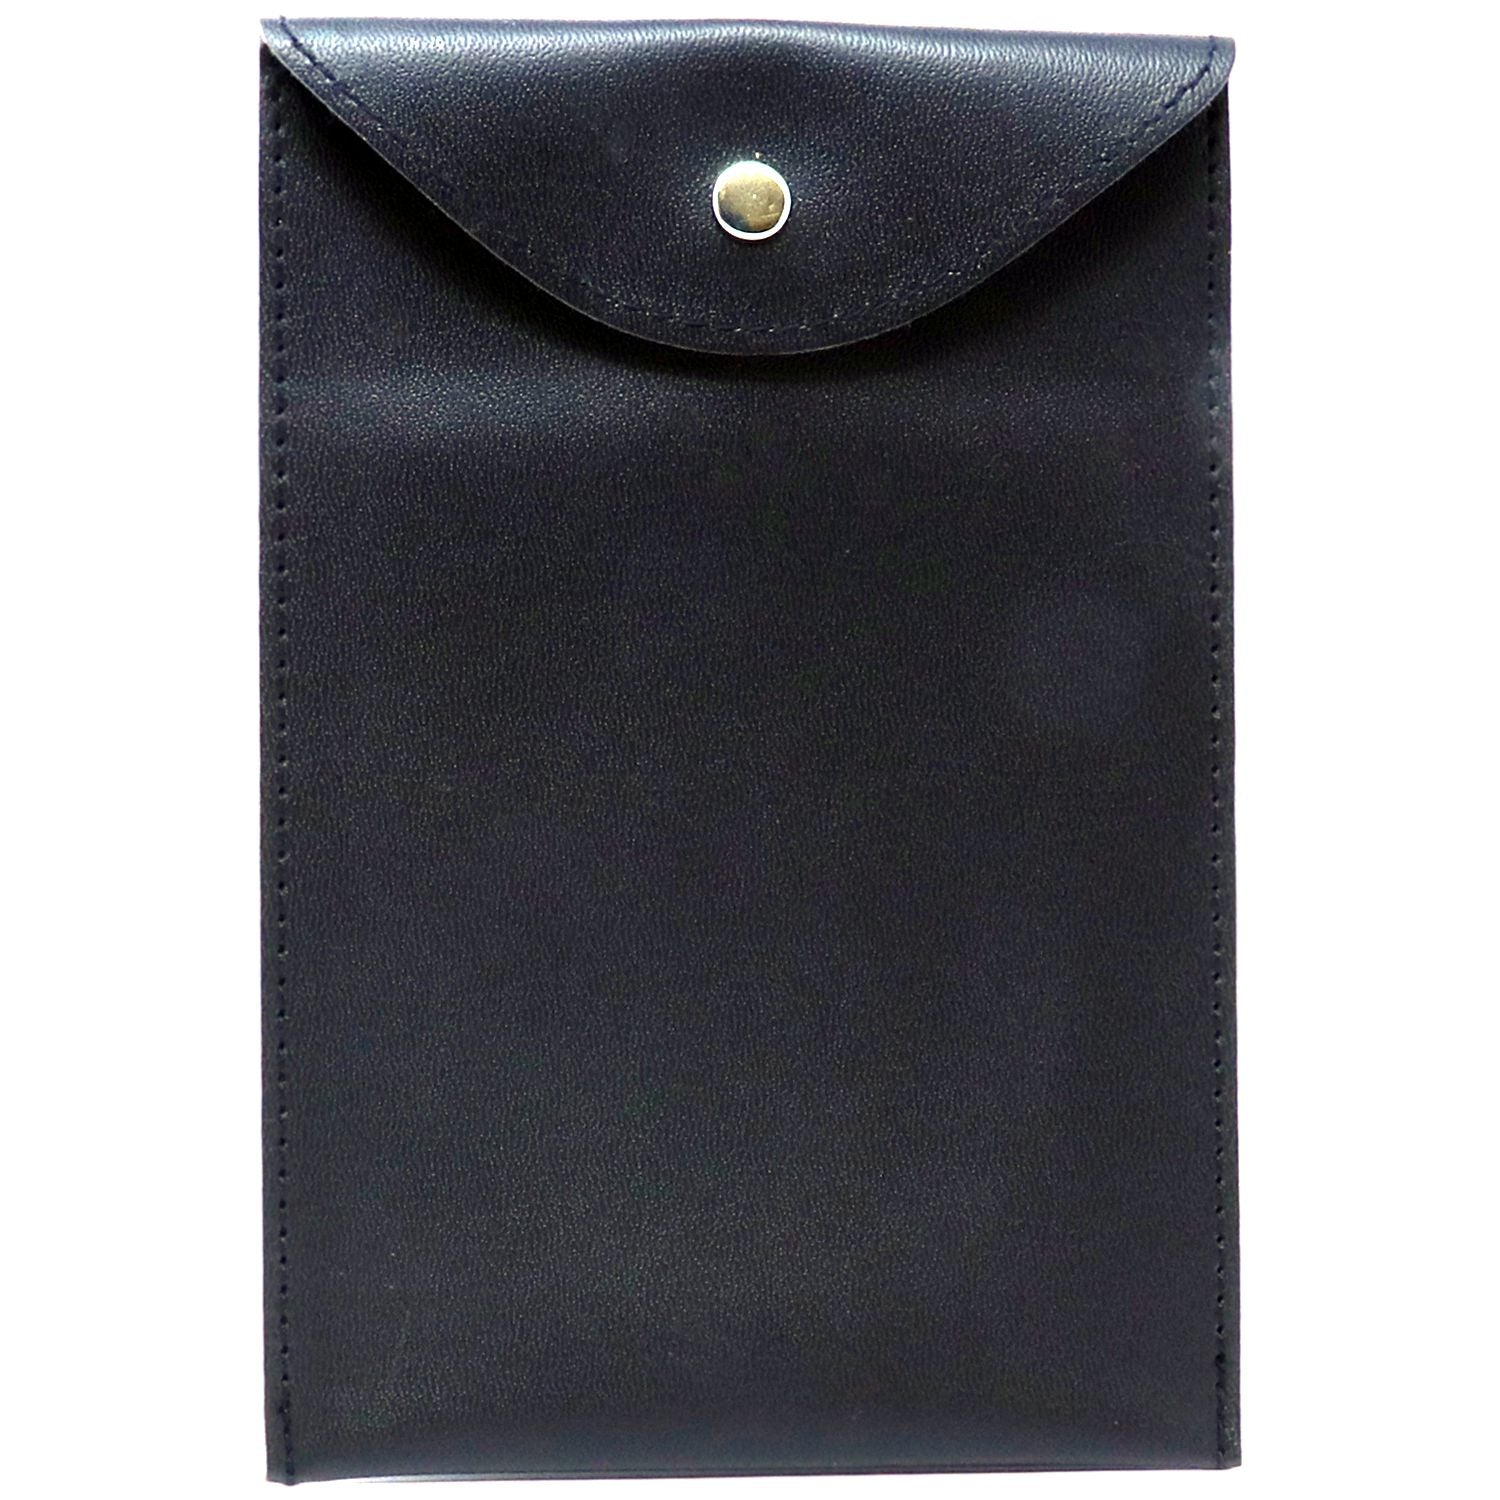 Deluxe Leatherette Pouch 1021 Main Image